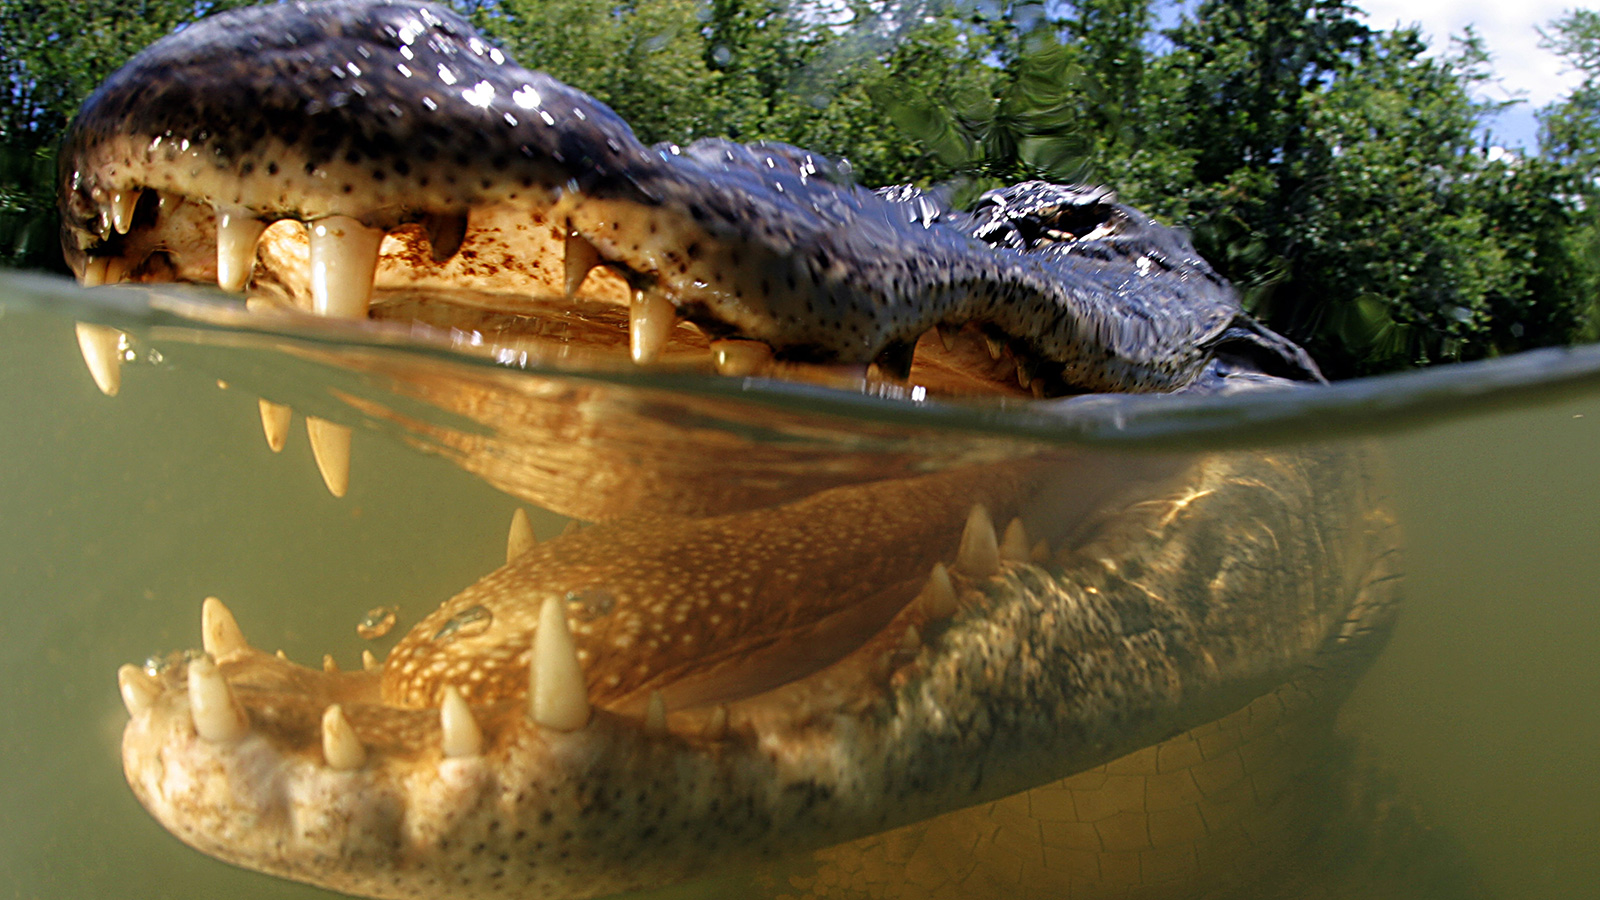 A Florida Man Is Hospitalized After An Alligator Attacks Him While Swimming